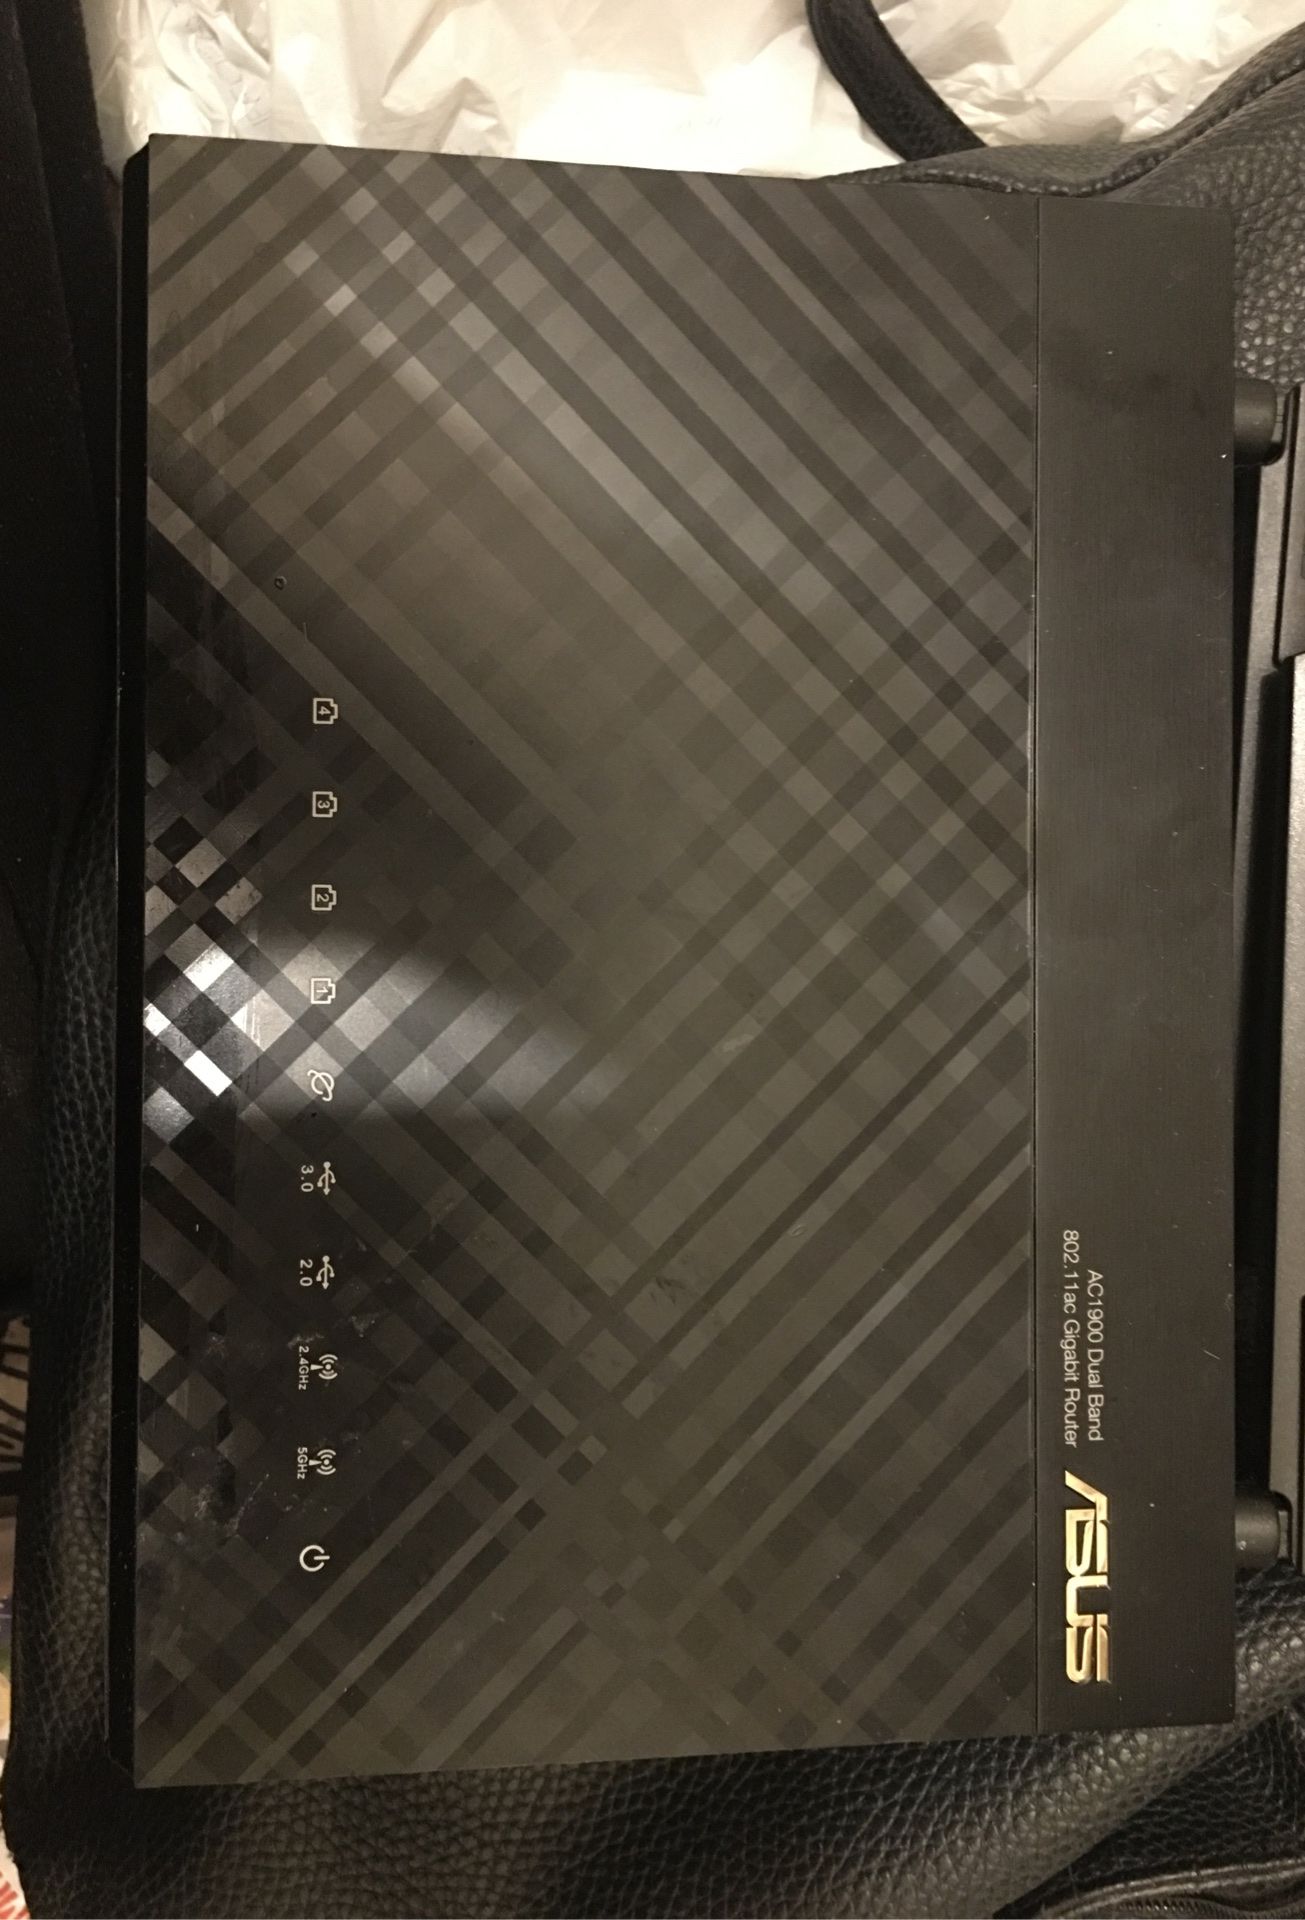 ASUS RT-AC68P AC1900 DUAL BAND ROUTER